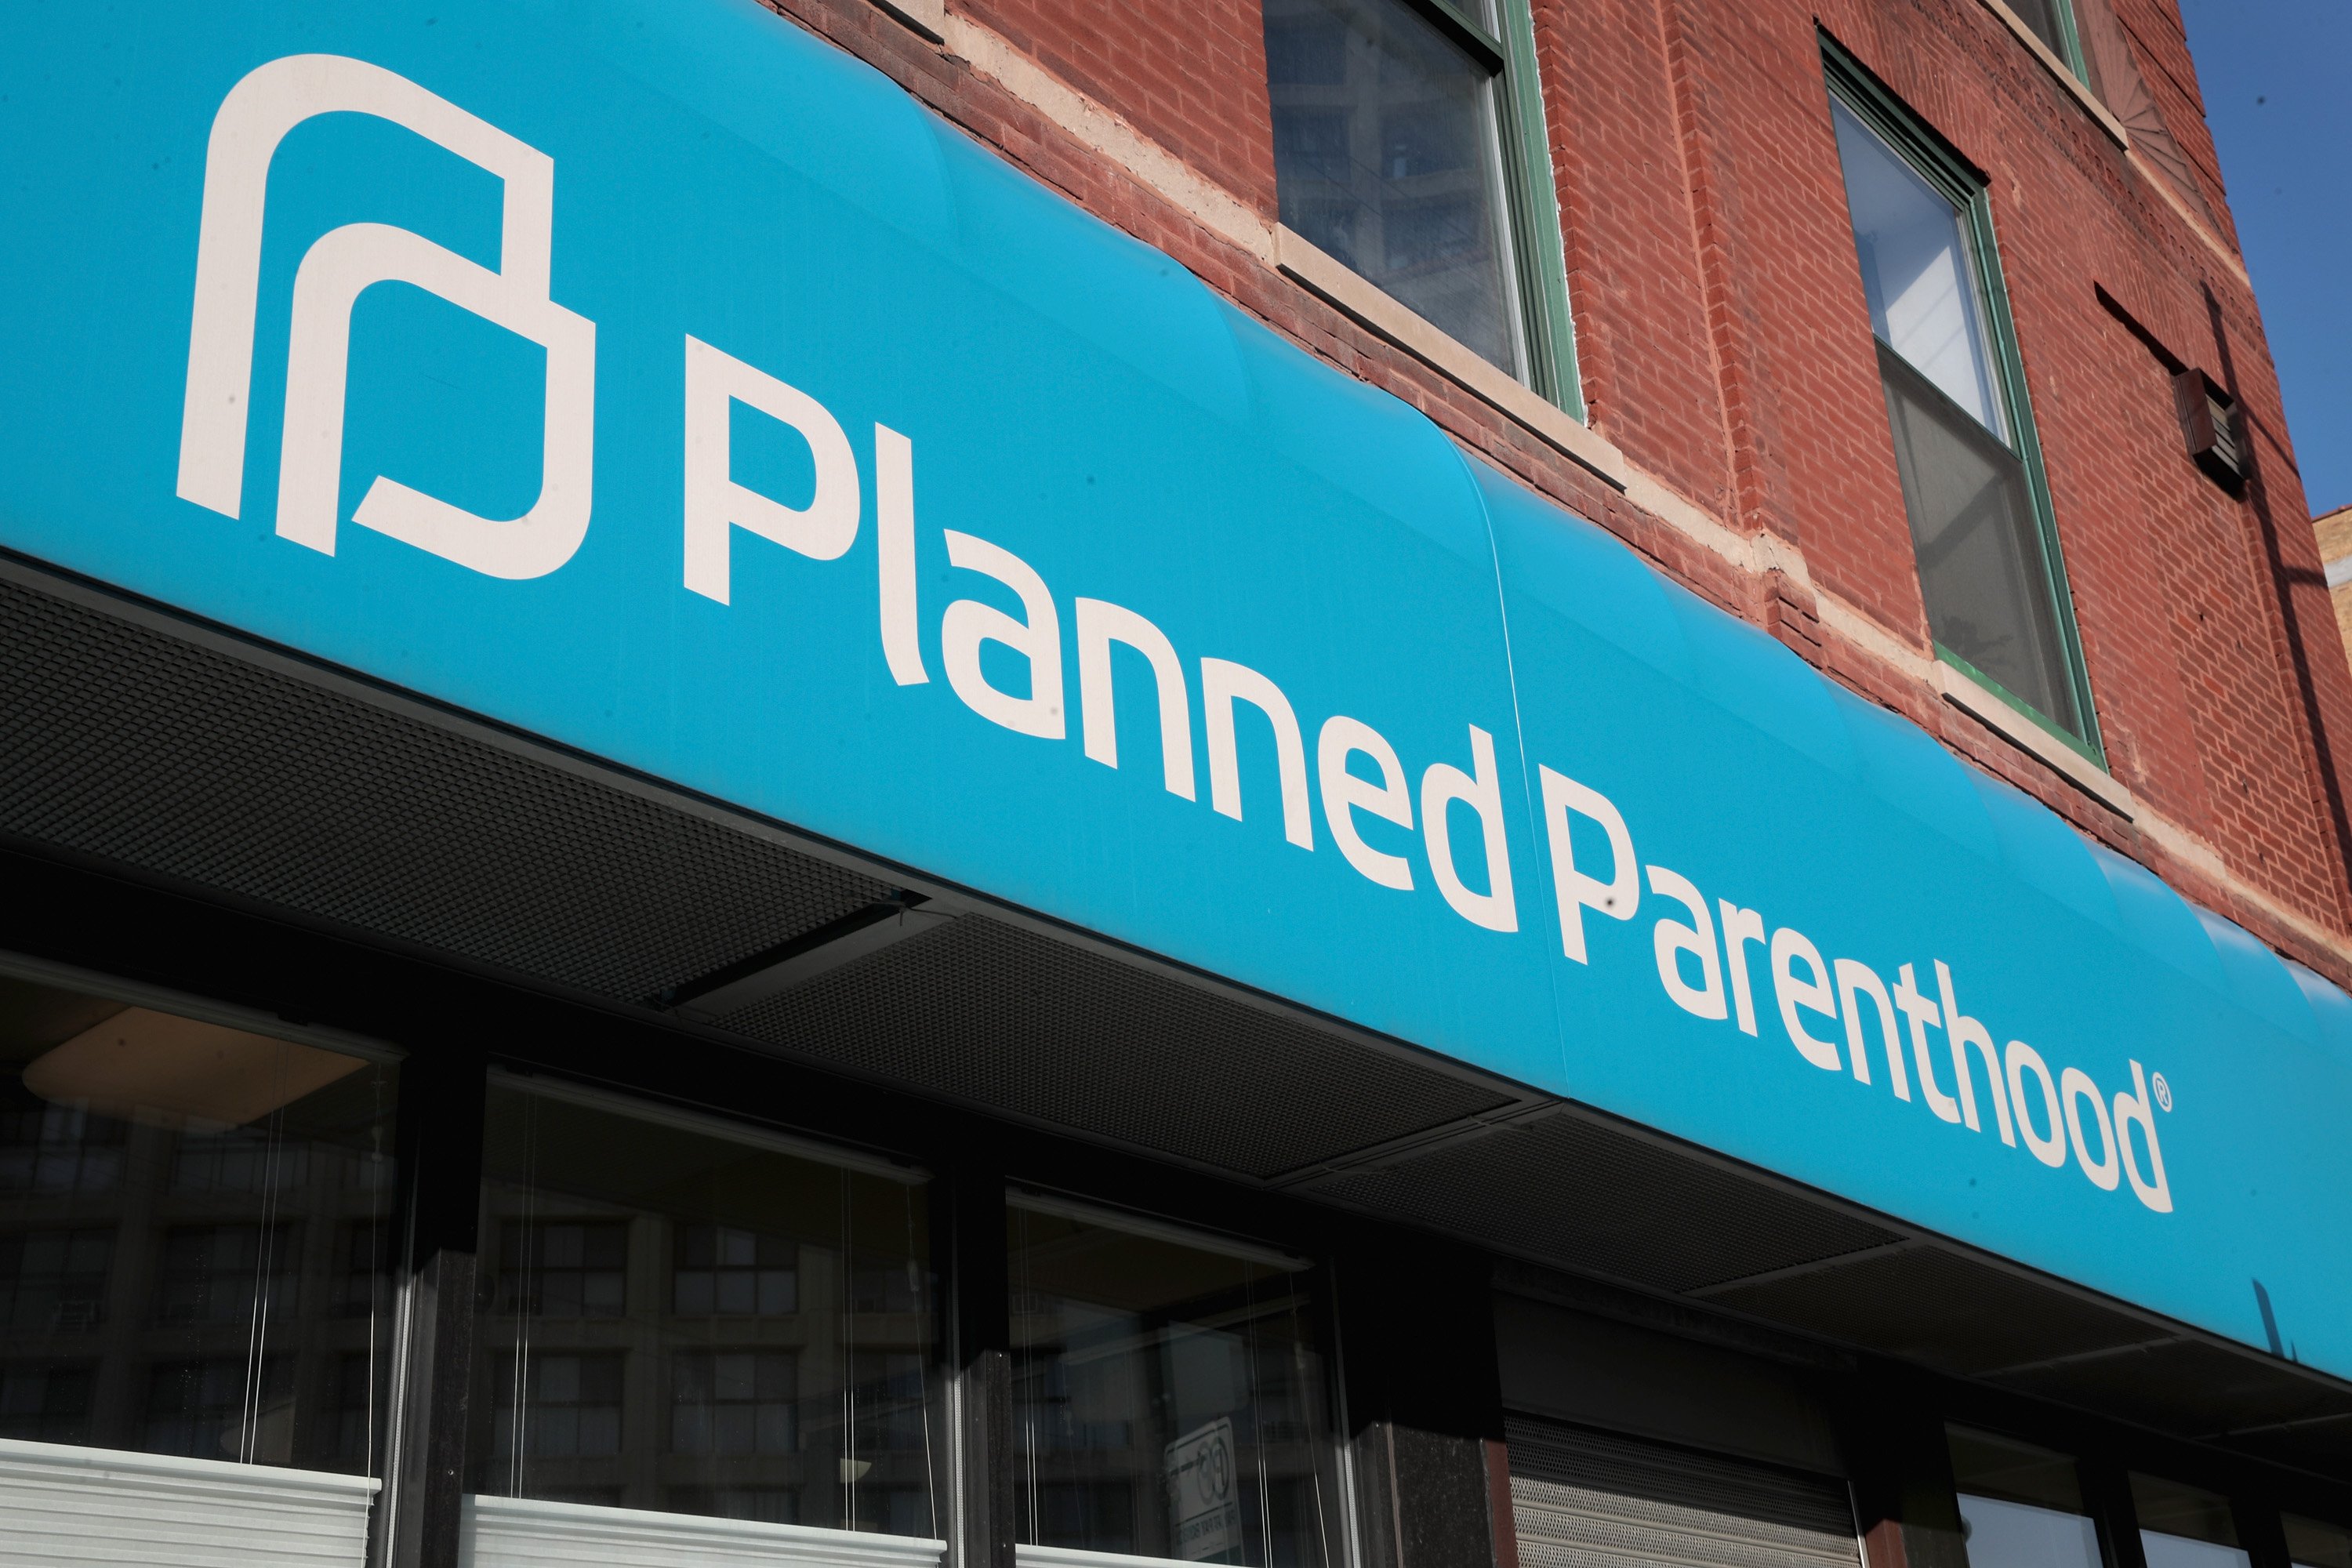 A Planned Parenthood clinic on May 18, 2018 in Chicago, Illinois. (Scott Olson/Getty Images